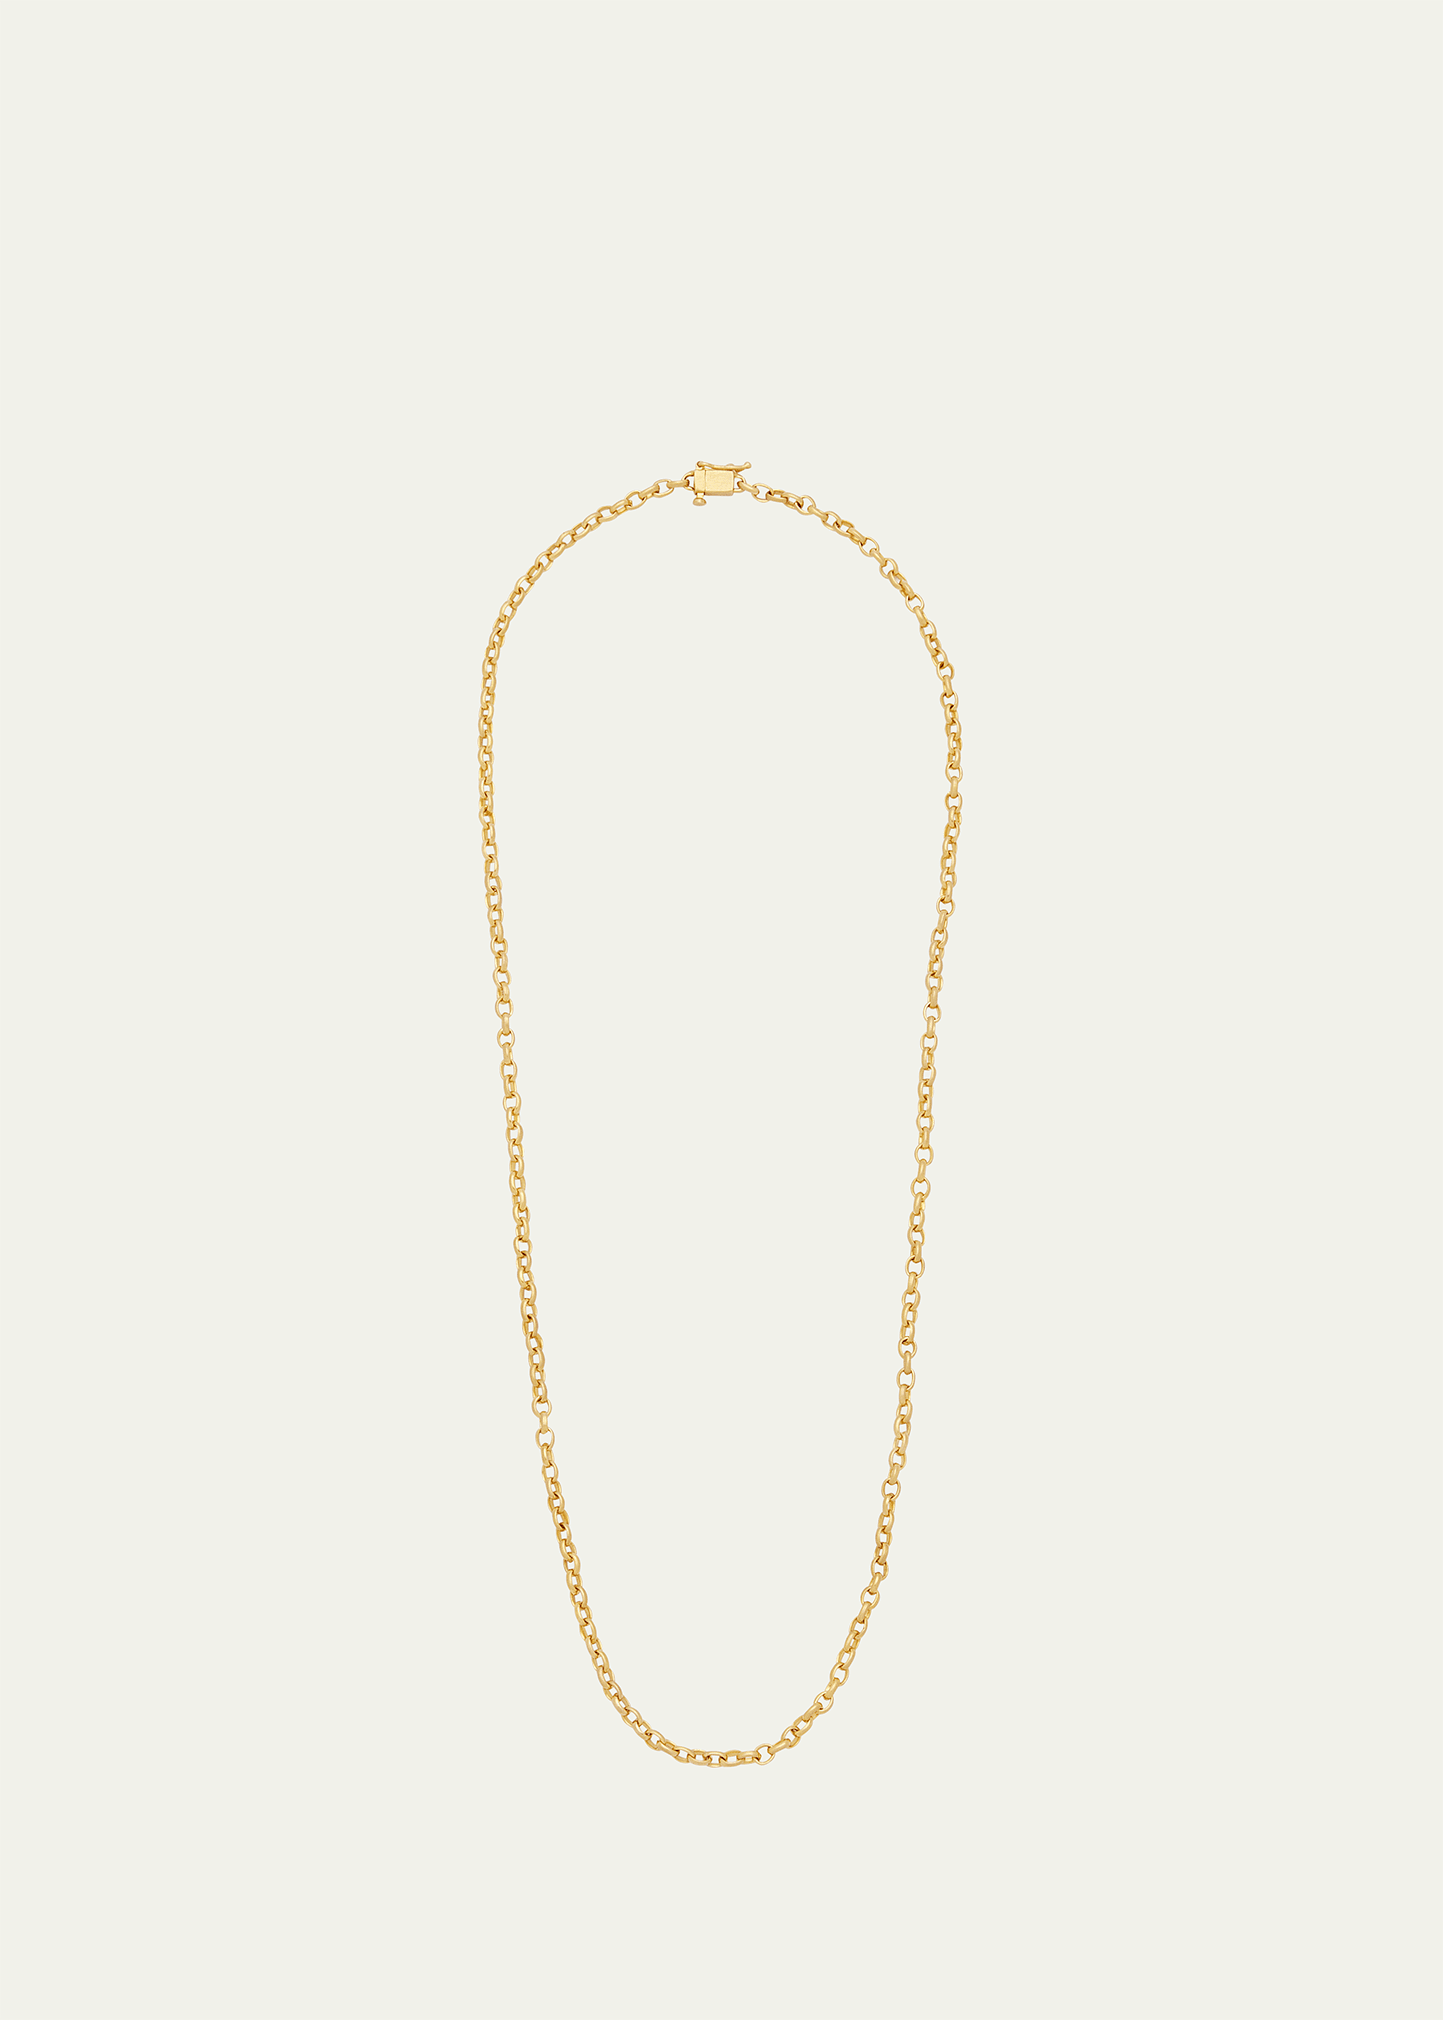 Fairy Chain in Yellow Gold